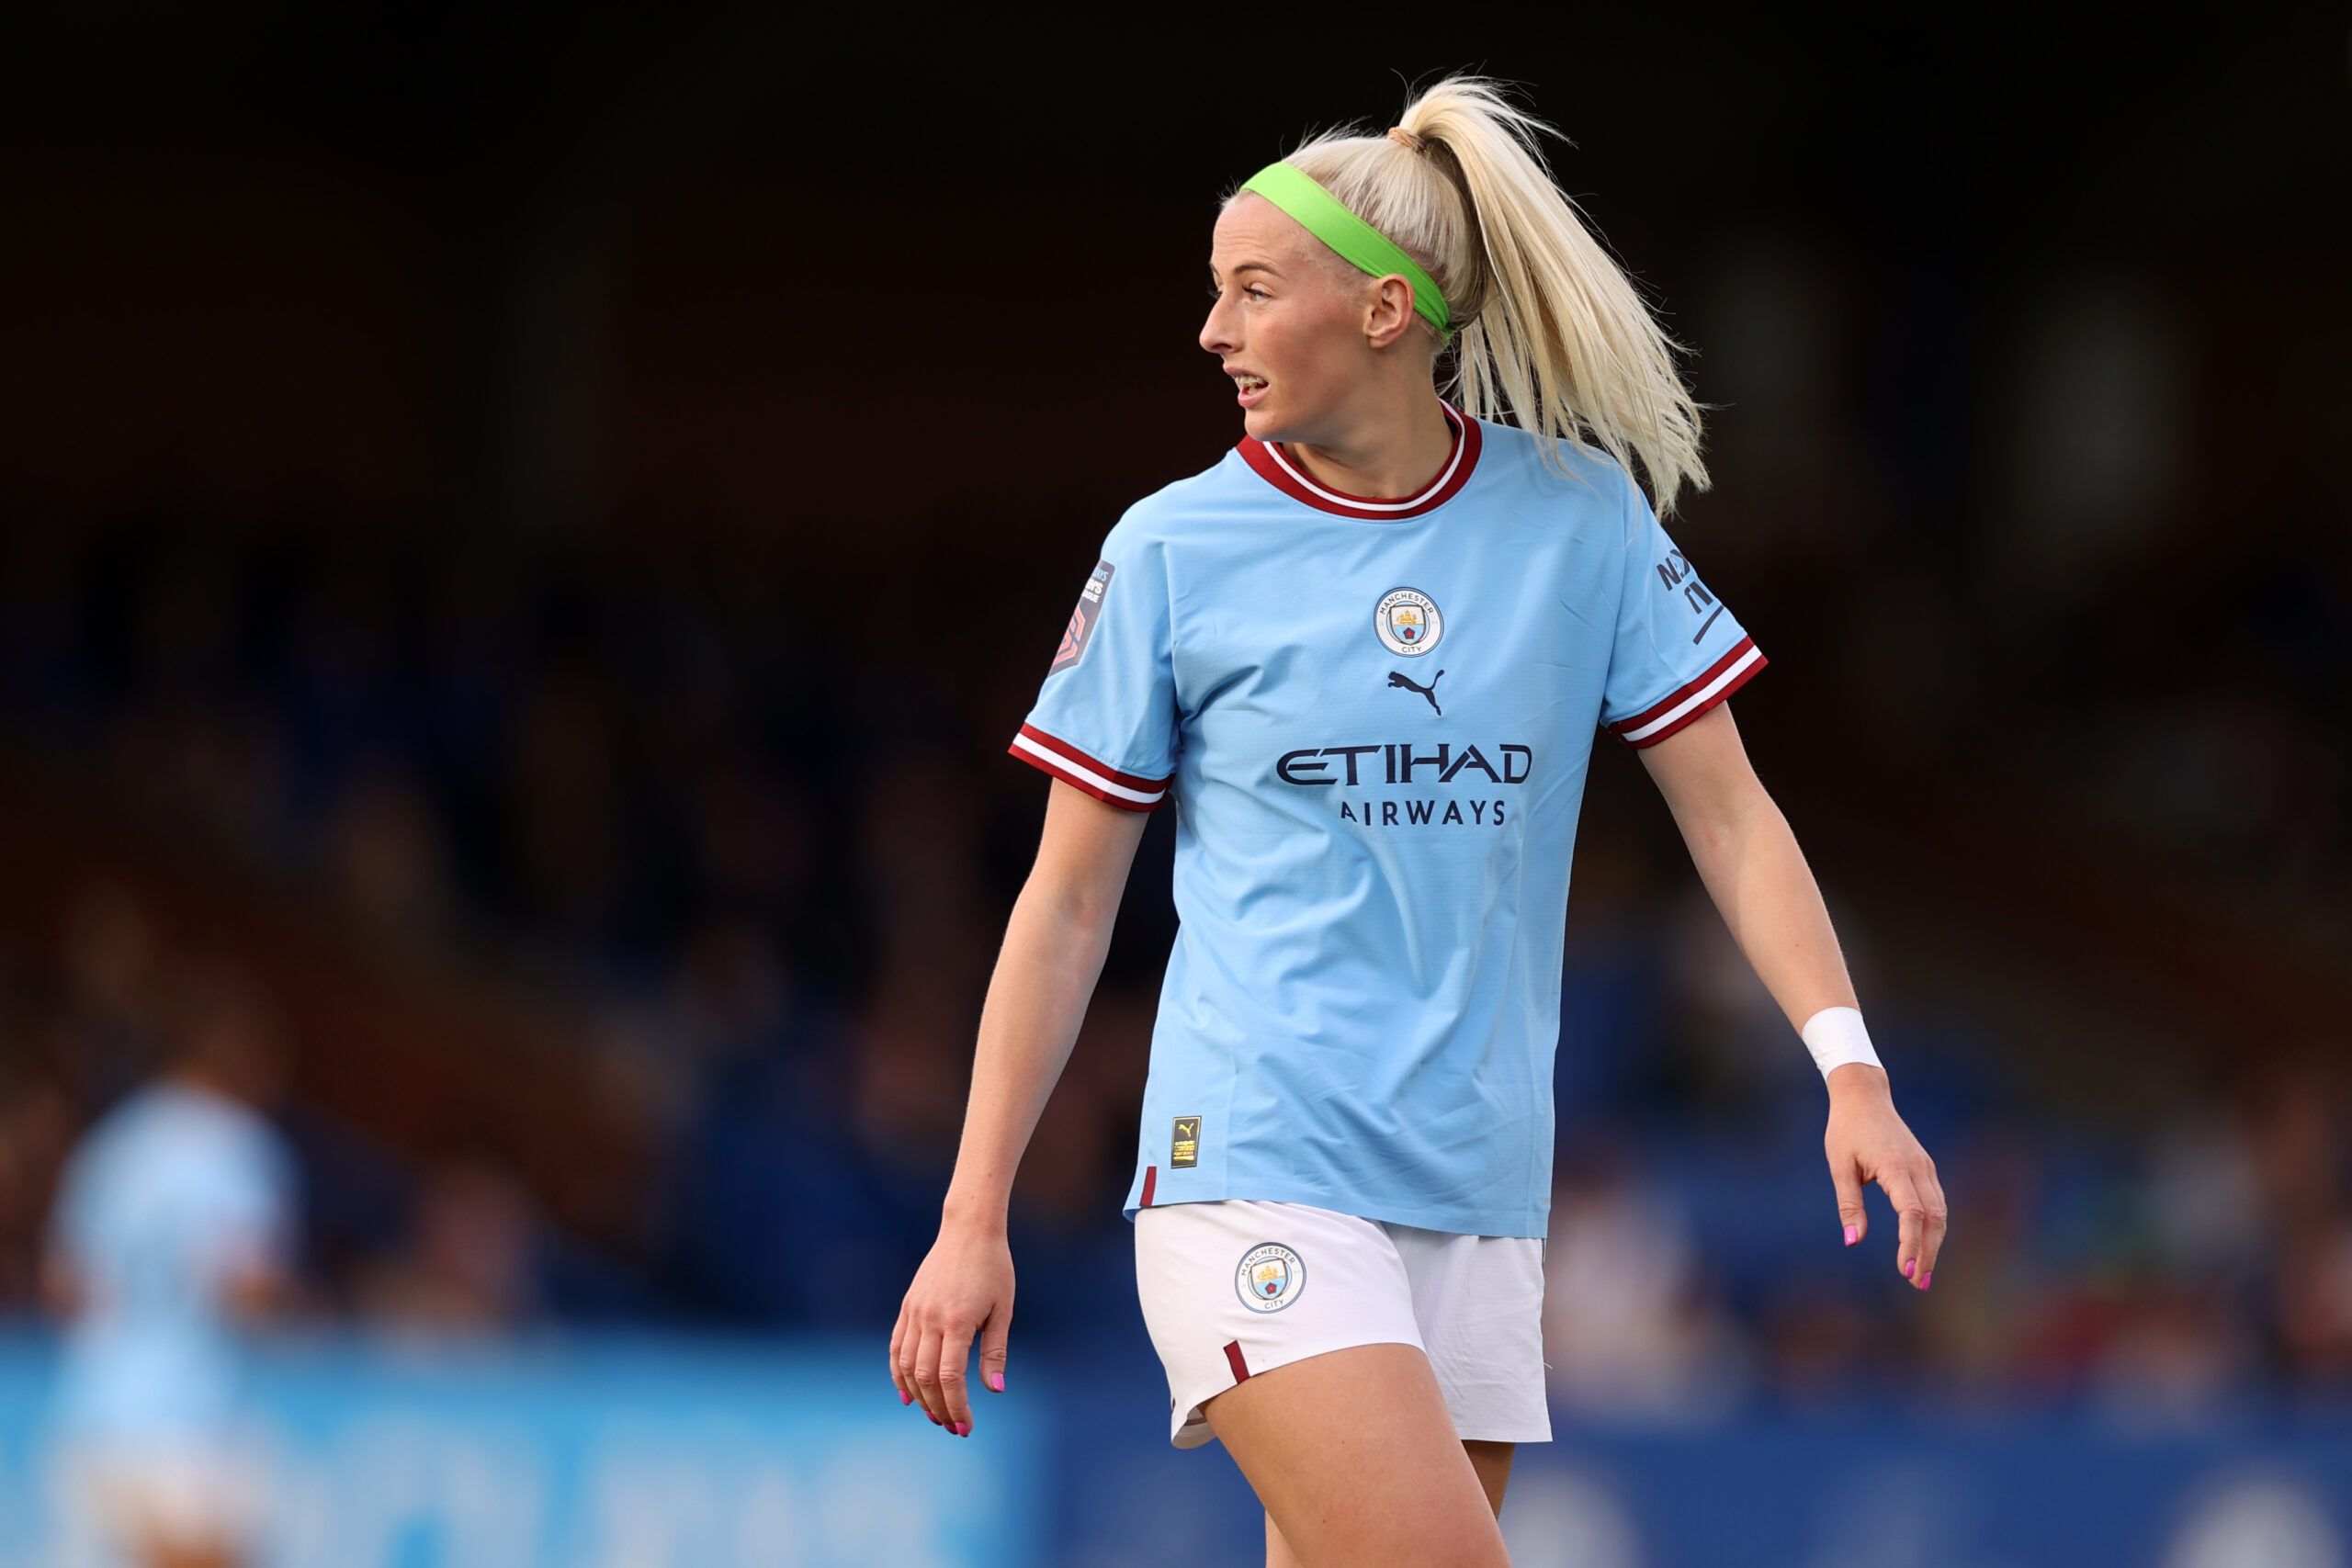 Man City's Women Side Nixes White Shorts to Help Players on Period